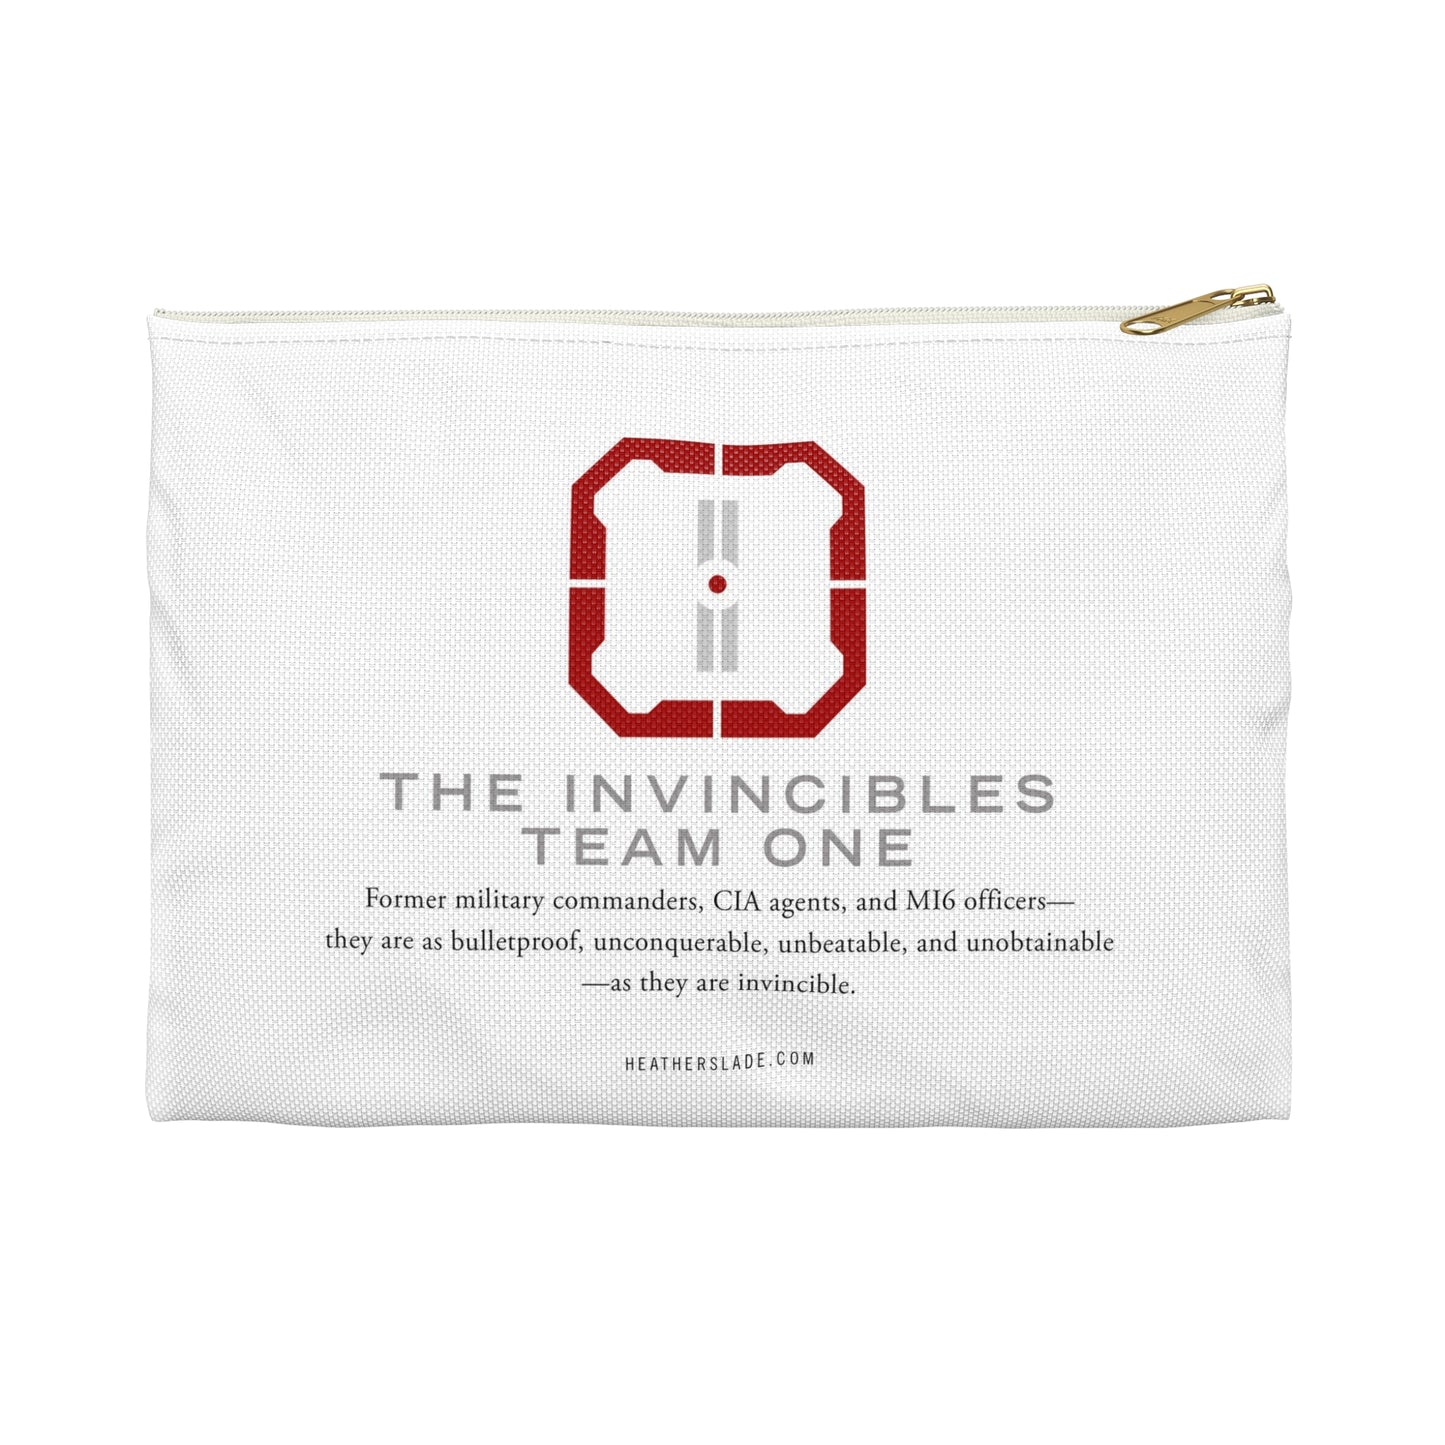 The Invincibles Team One Accessory Pouch